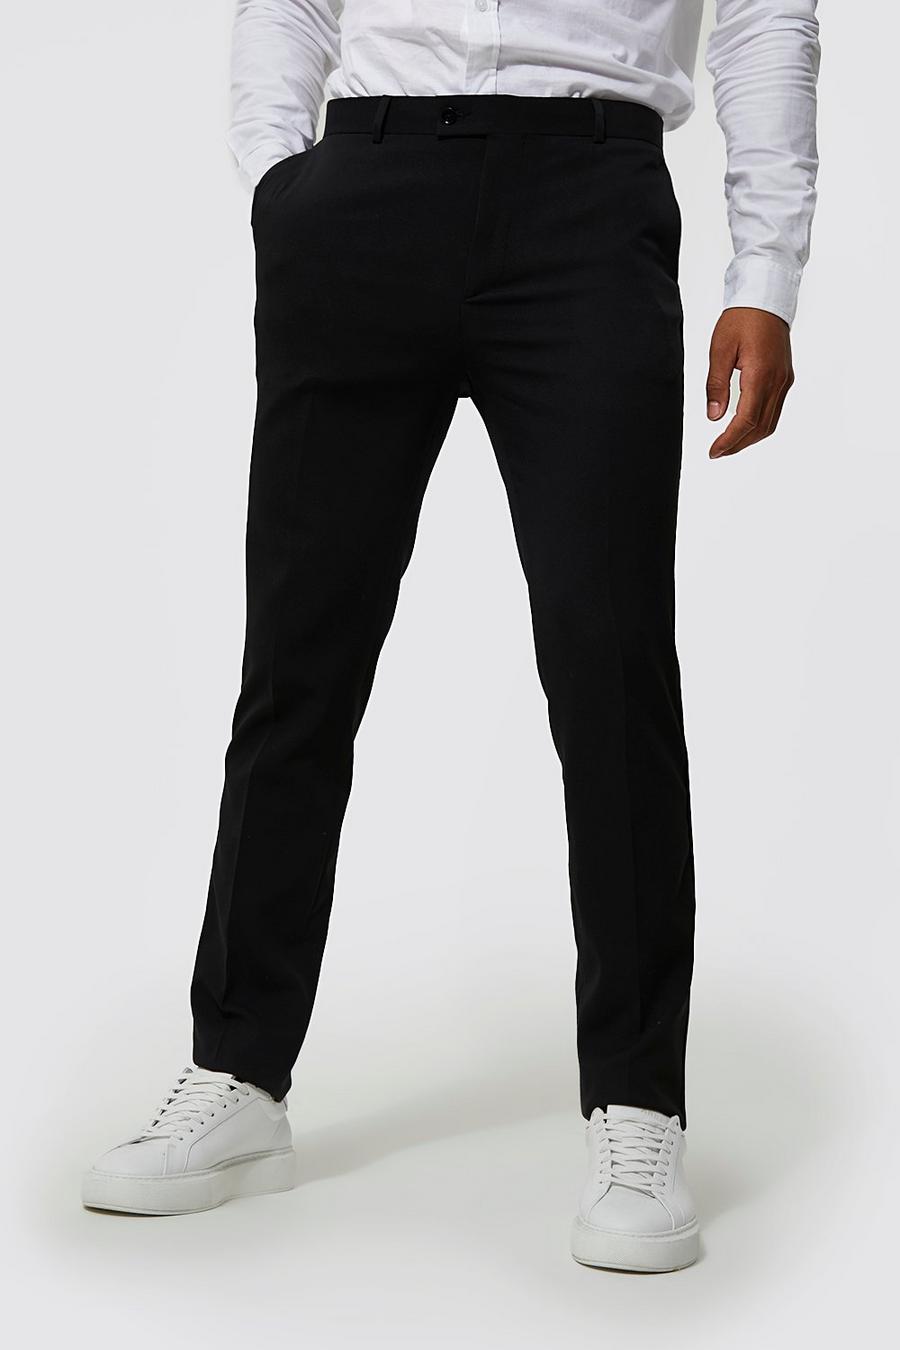 Black Tall Skinny Tuxedo Suit Trousers image number 1